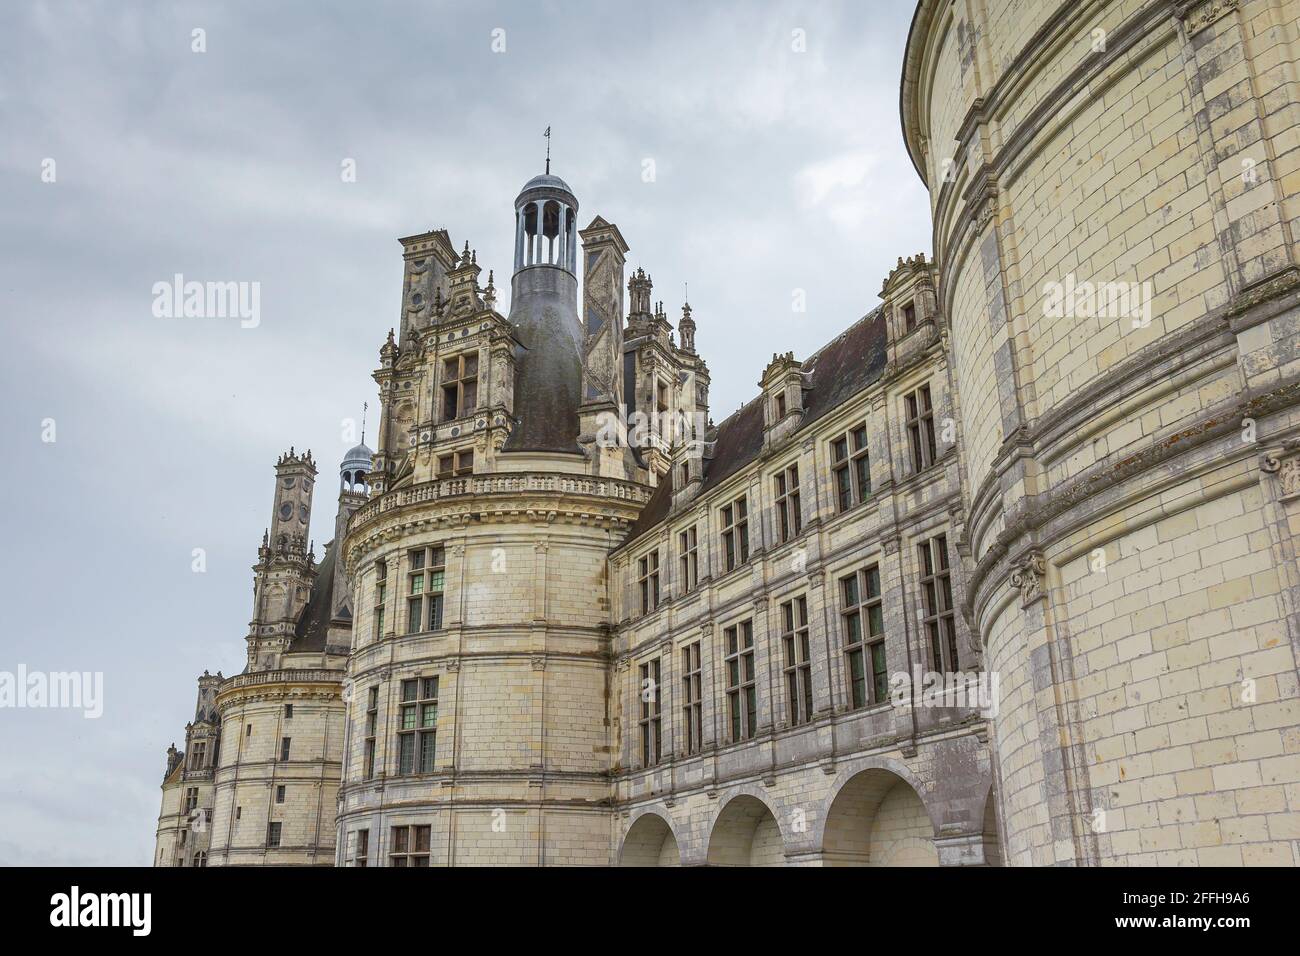 Dark clouds and dramatic scene over Chateau Chambord .  Castle with very distinctive French Renaissance architecture Stock Photo